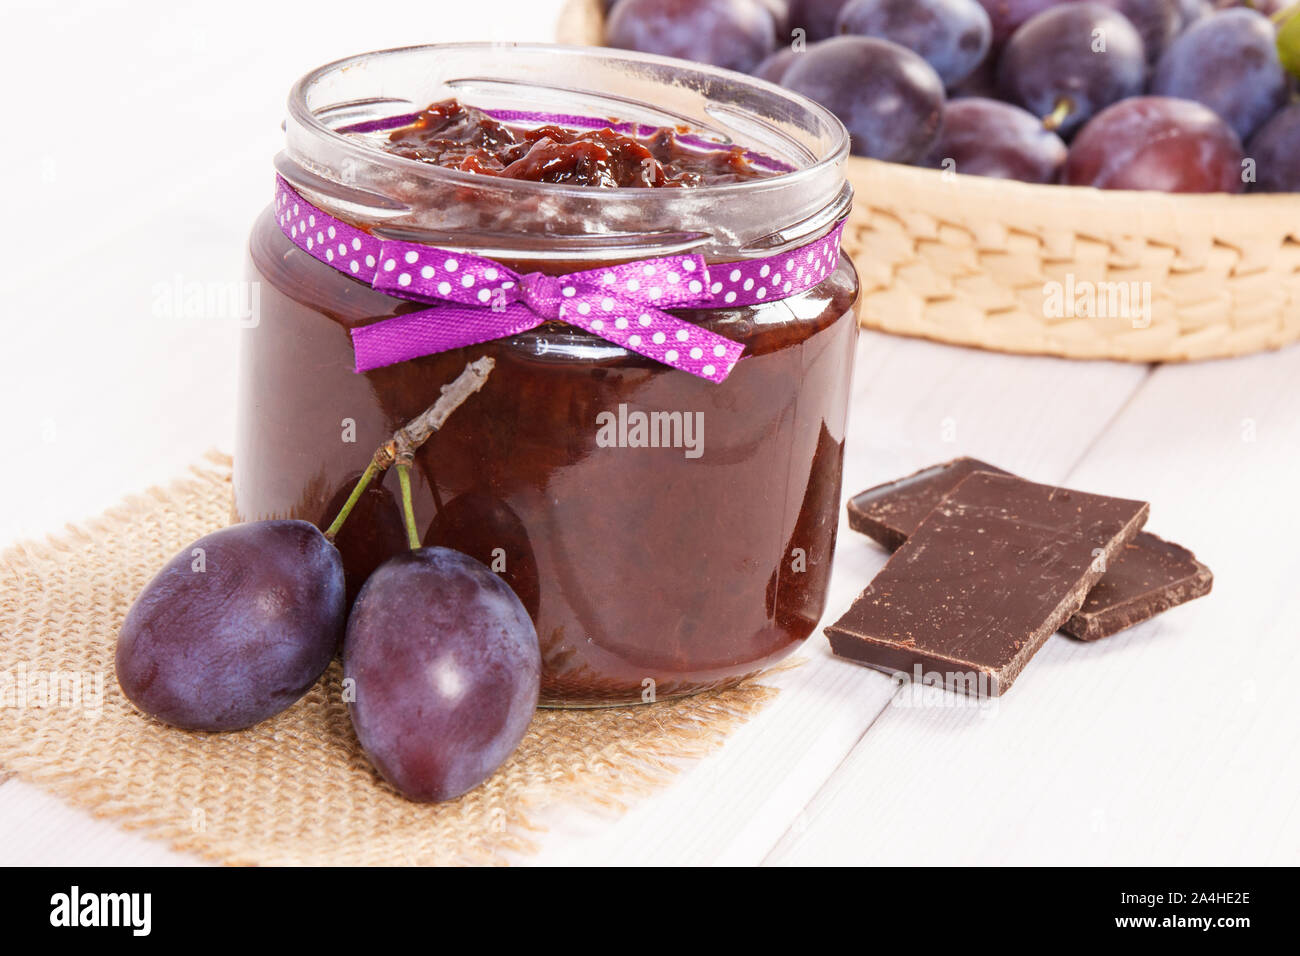 Fresh plum jam or marmalade in glass jar, ripe fruits in wicker basket and chocolate, concept of healthy sweet dessert Stock Photo